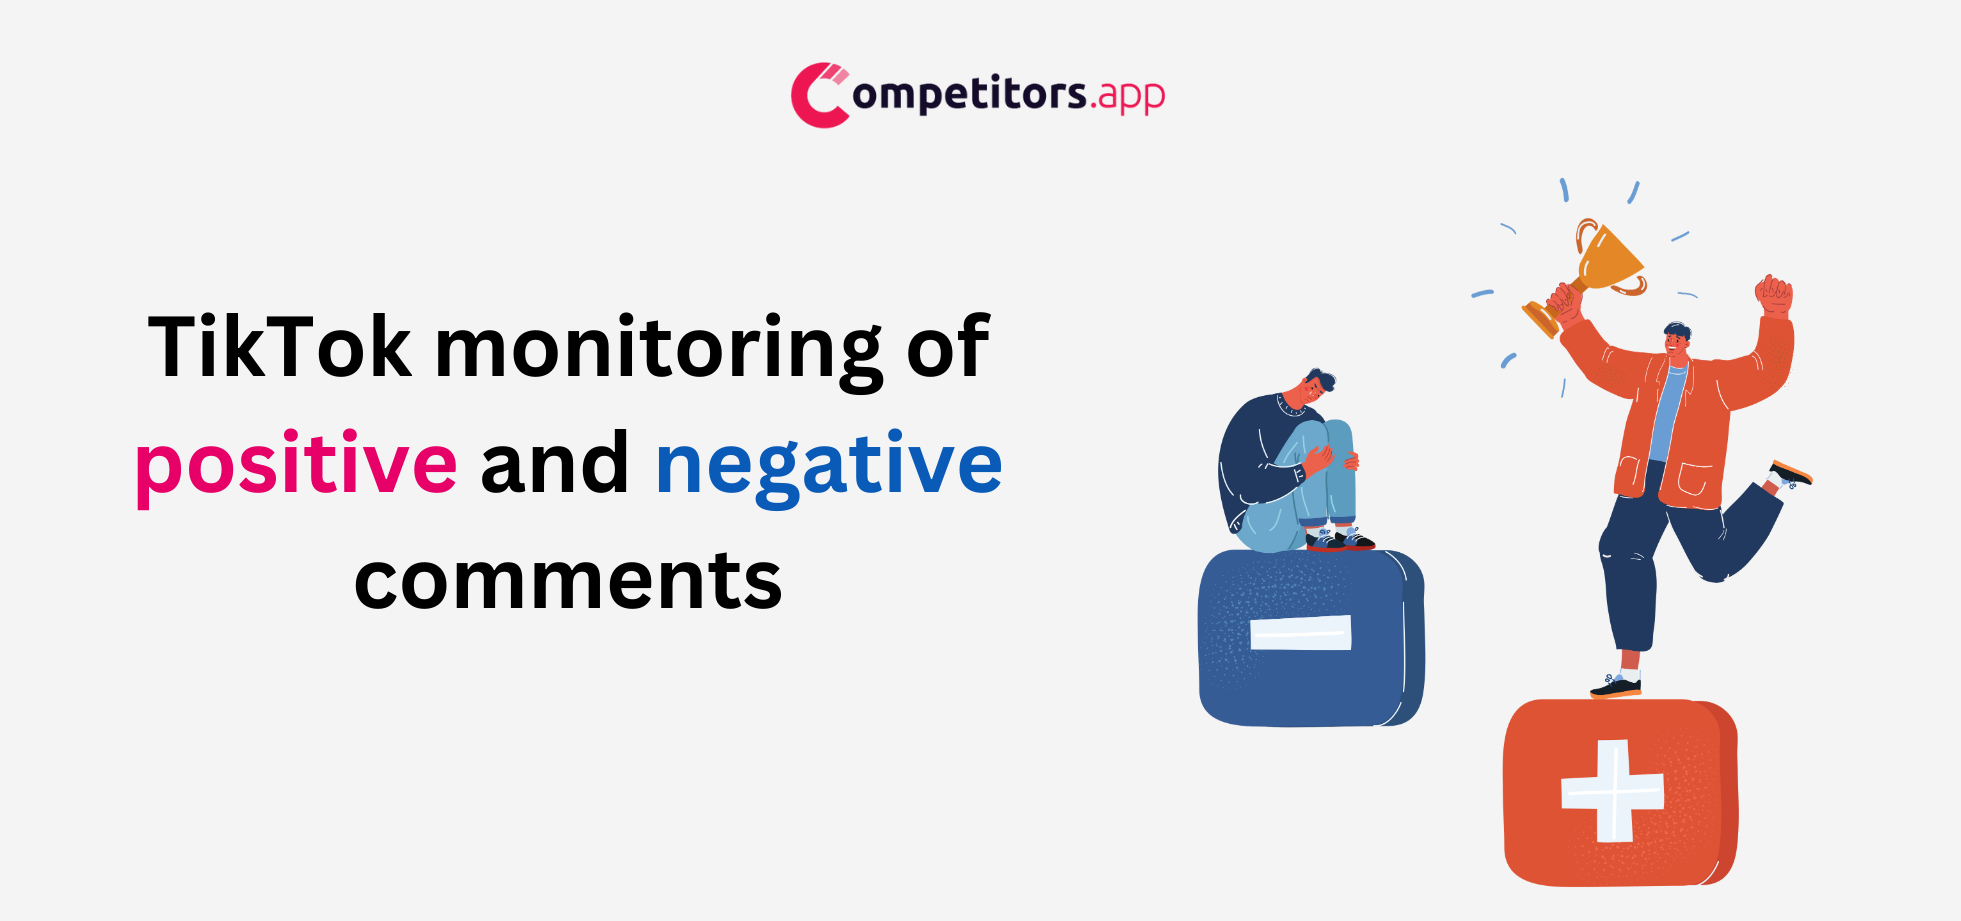 TikTok monitoring of positive and negative comments